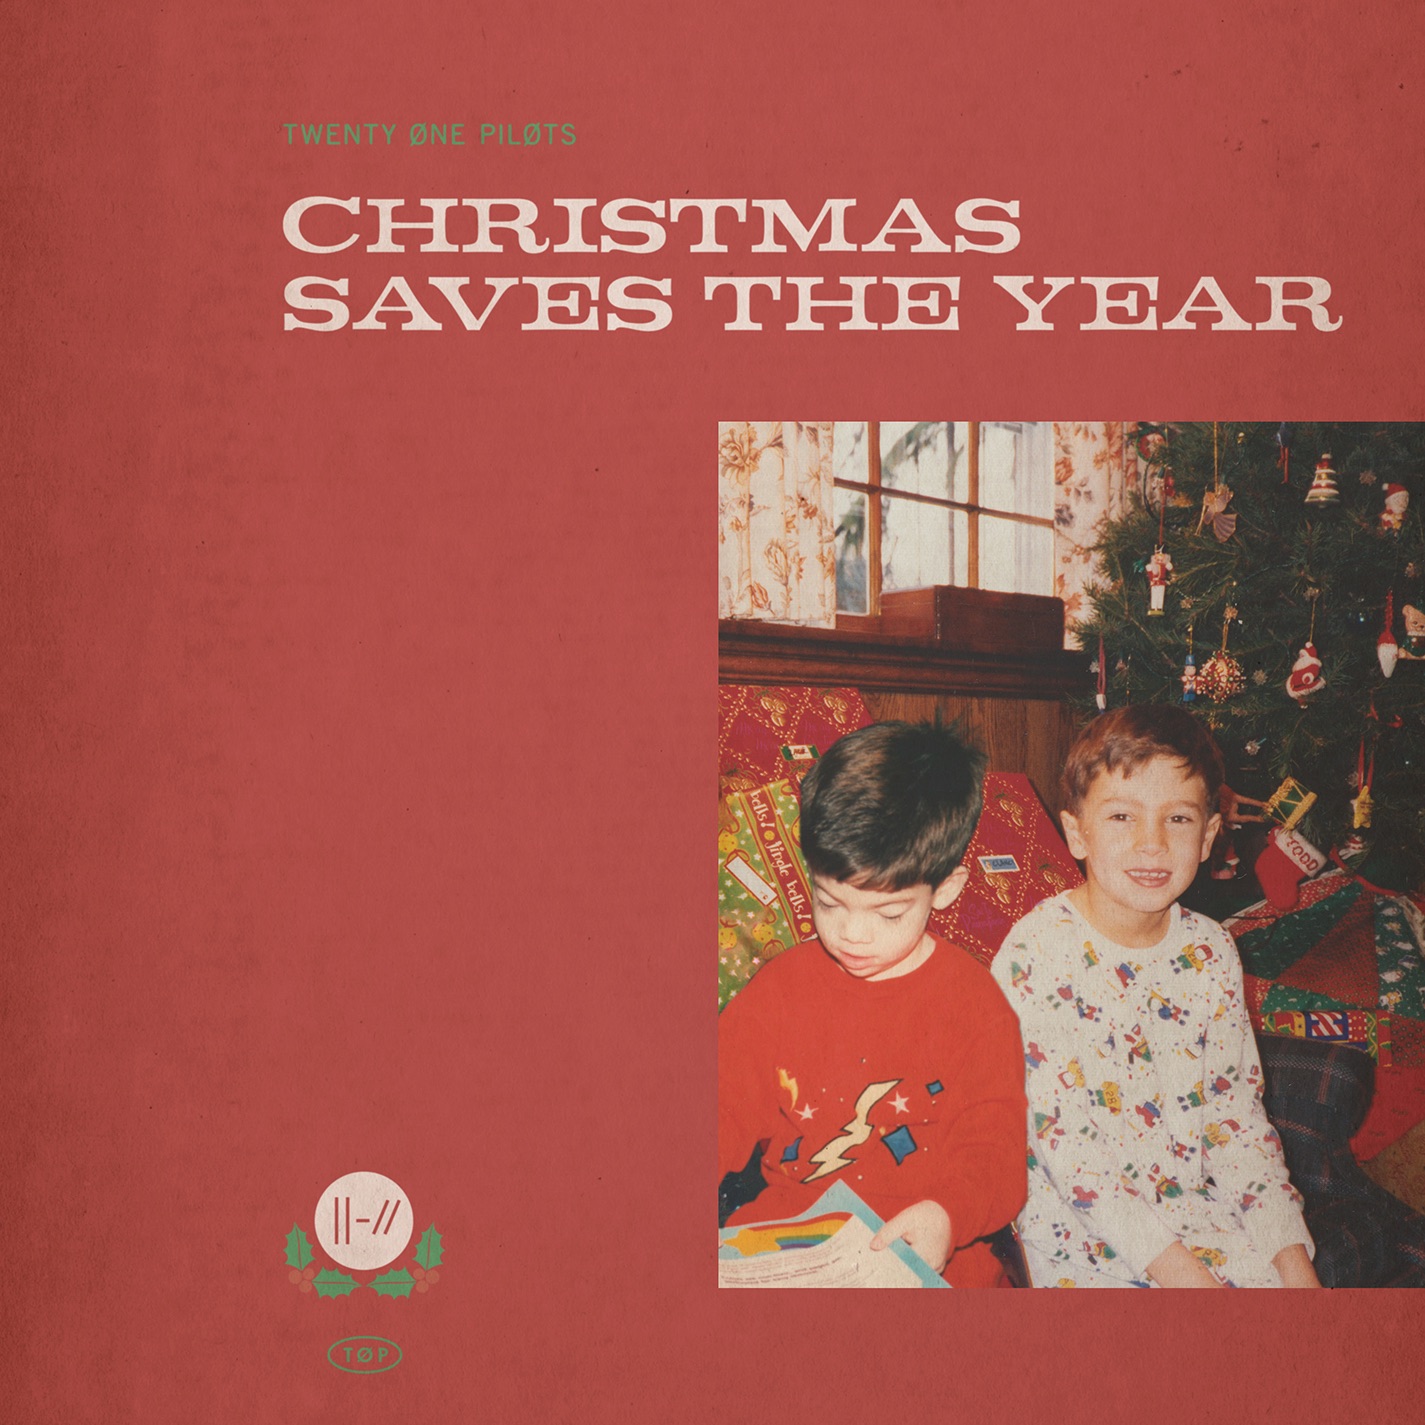 Twenty One Pilots - Christmas Saves the Year [Mastered for iTunes] (2020) - Single [iTunes Plus AAC M4A]